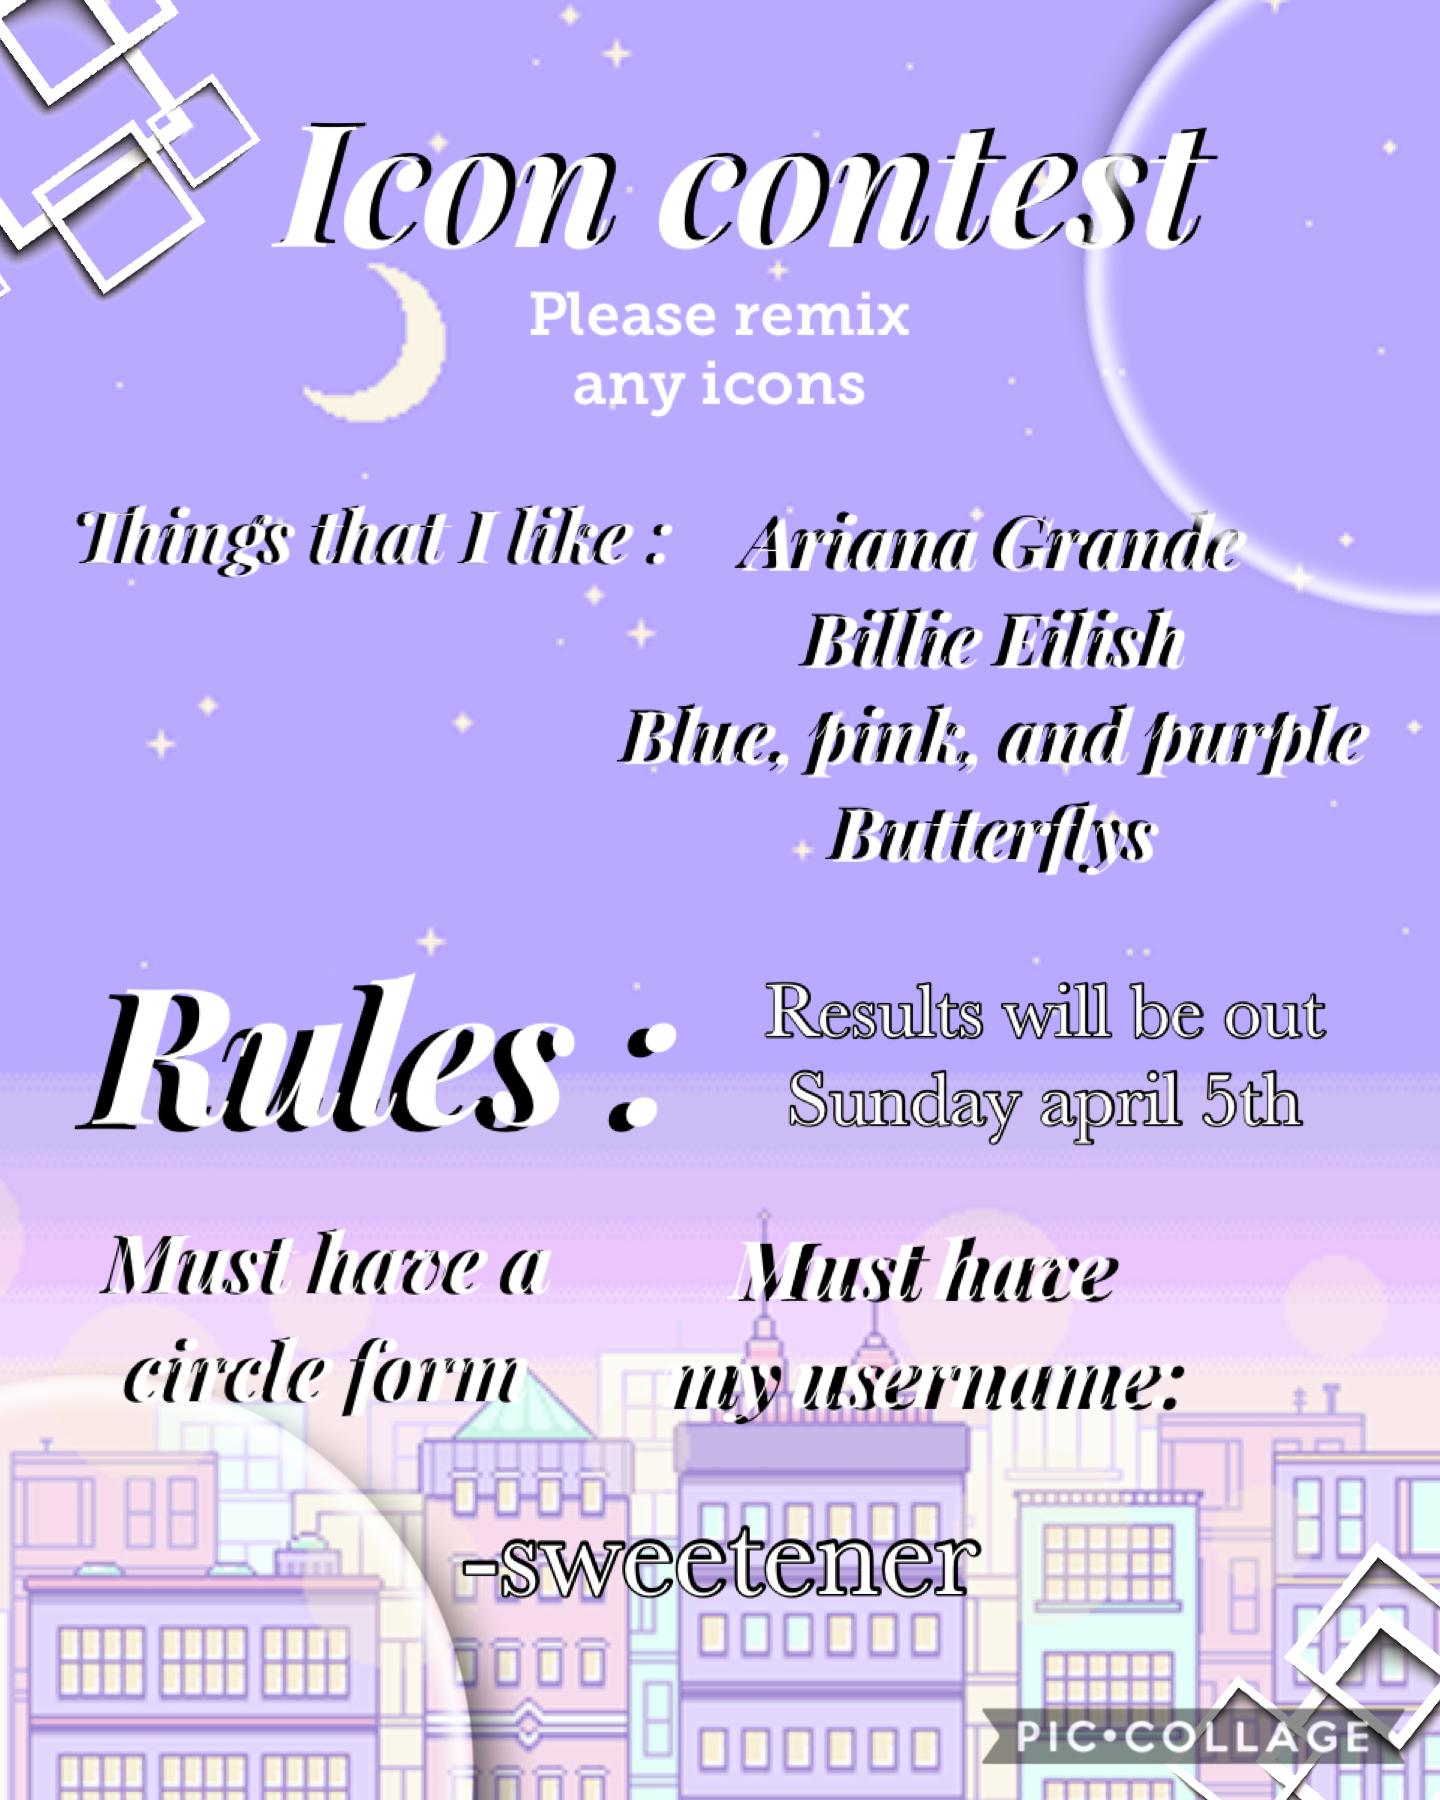 Tap!
Icon contest please join winner will be announced Sunday April 5th